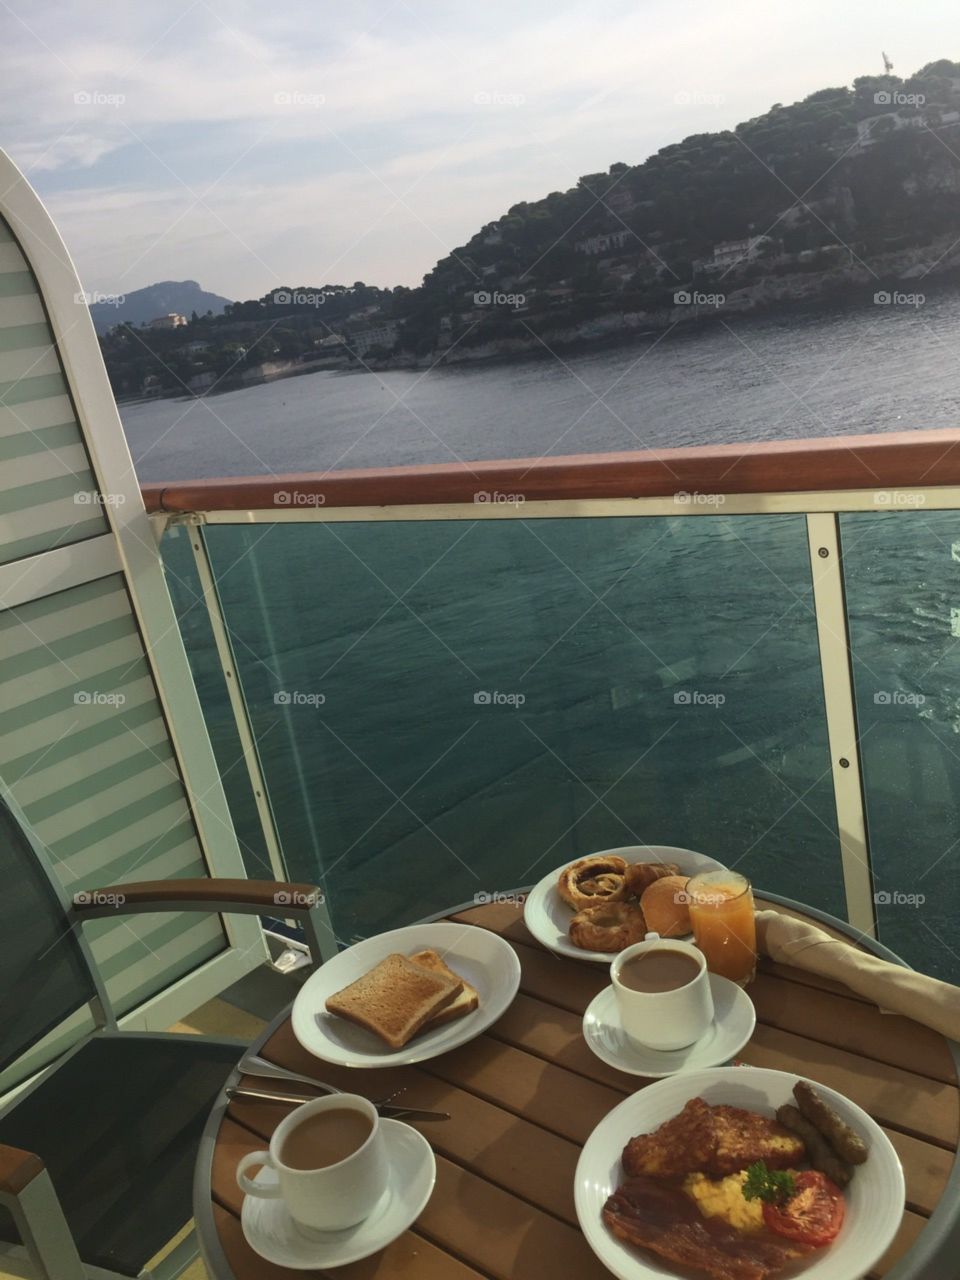 Royal Caribbean Breakfast. American style in the Mediterranean. Best views ever! Treat yourself royally: get a balcony stateroom if you cruise around the Mediterranean because by the end of the cruise you will be ready to pay more just to be able to wake up to an amazing sea and mountains view again!